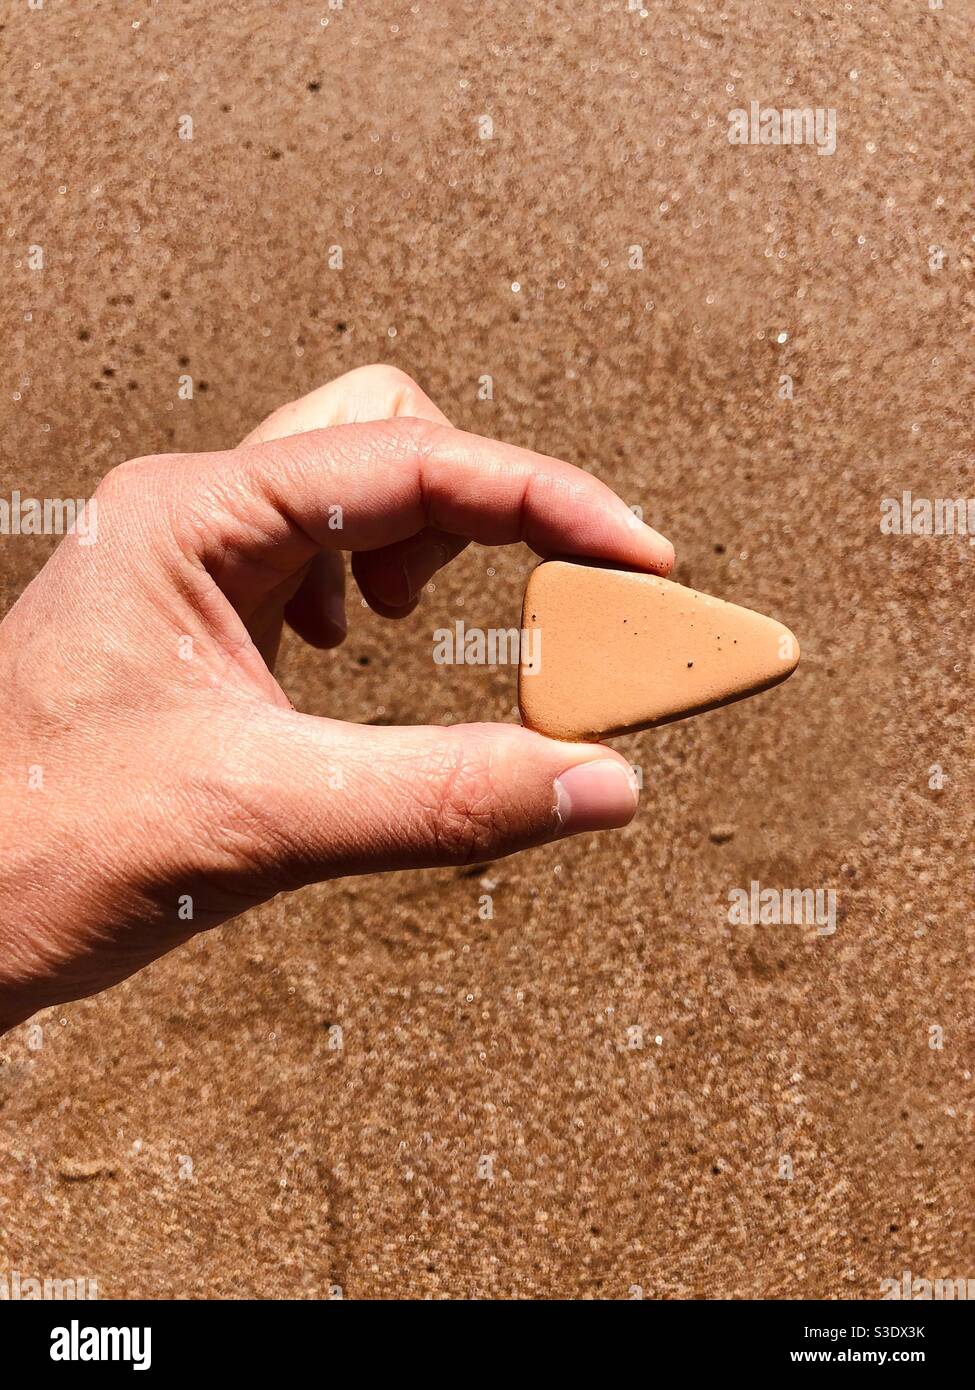 Hand of a person holding a rock that looks like a play button icon Stock Photo